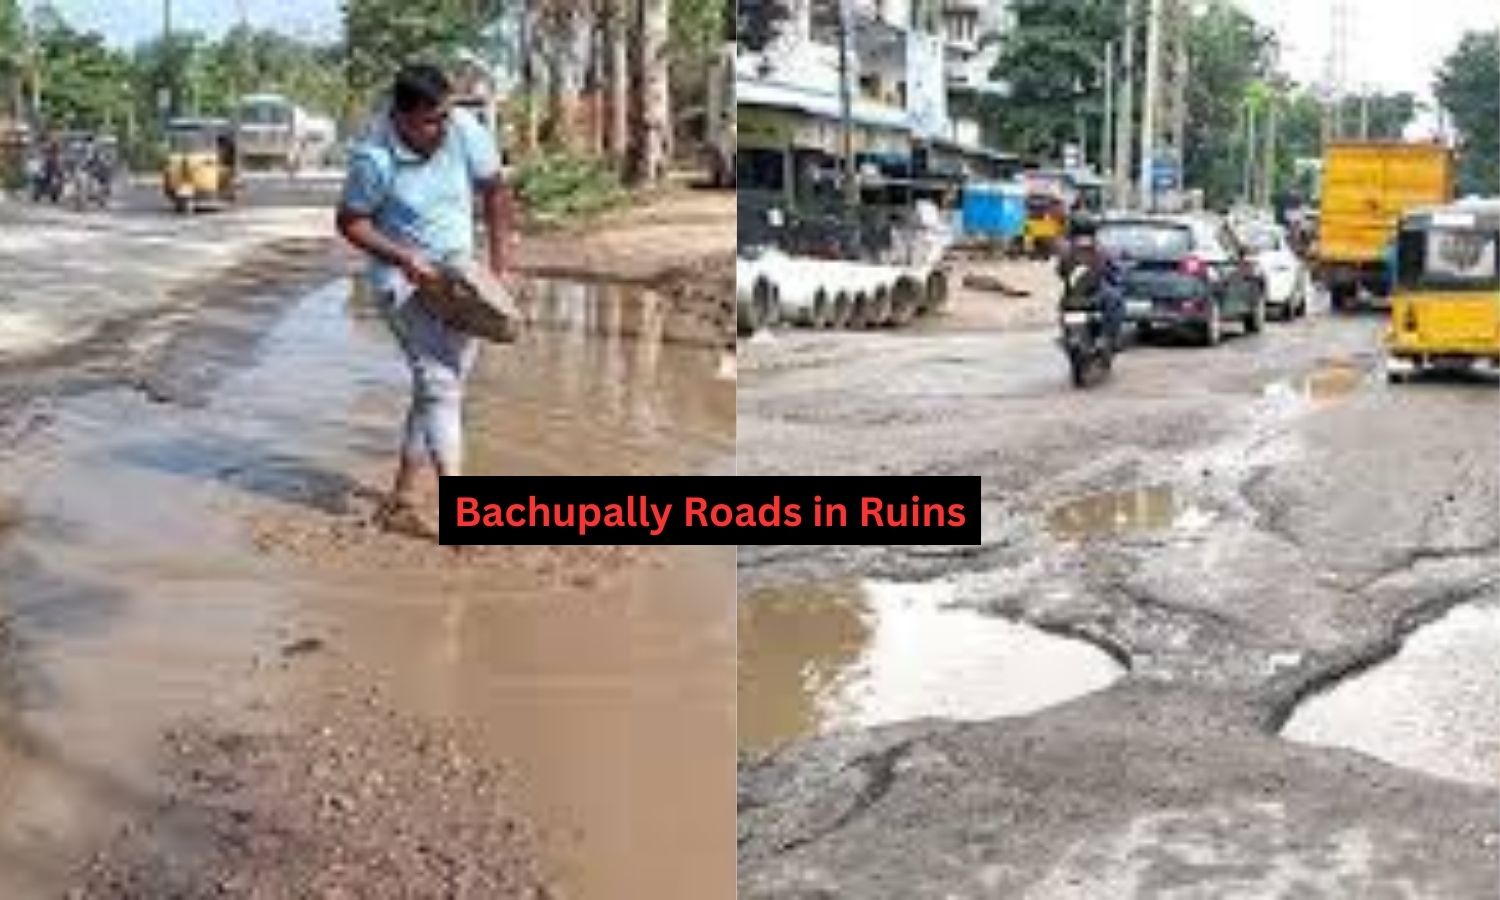 Bachupally Roads Left In Disrepair As Municipal Authorities Fail To Act.